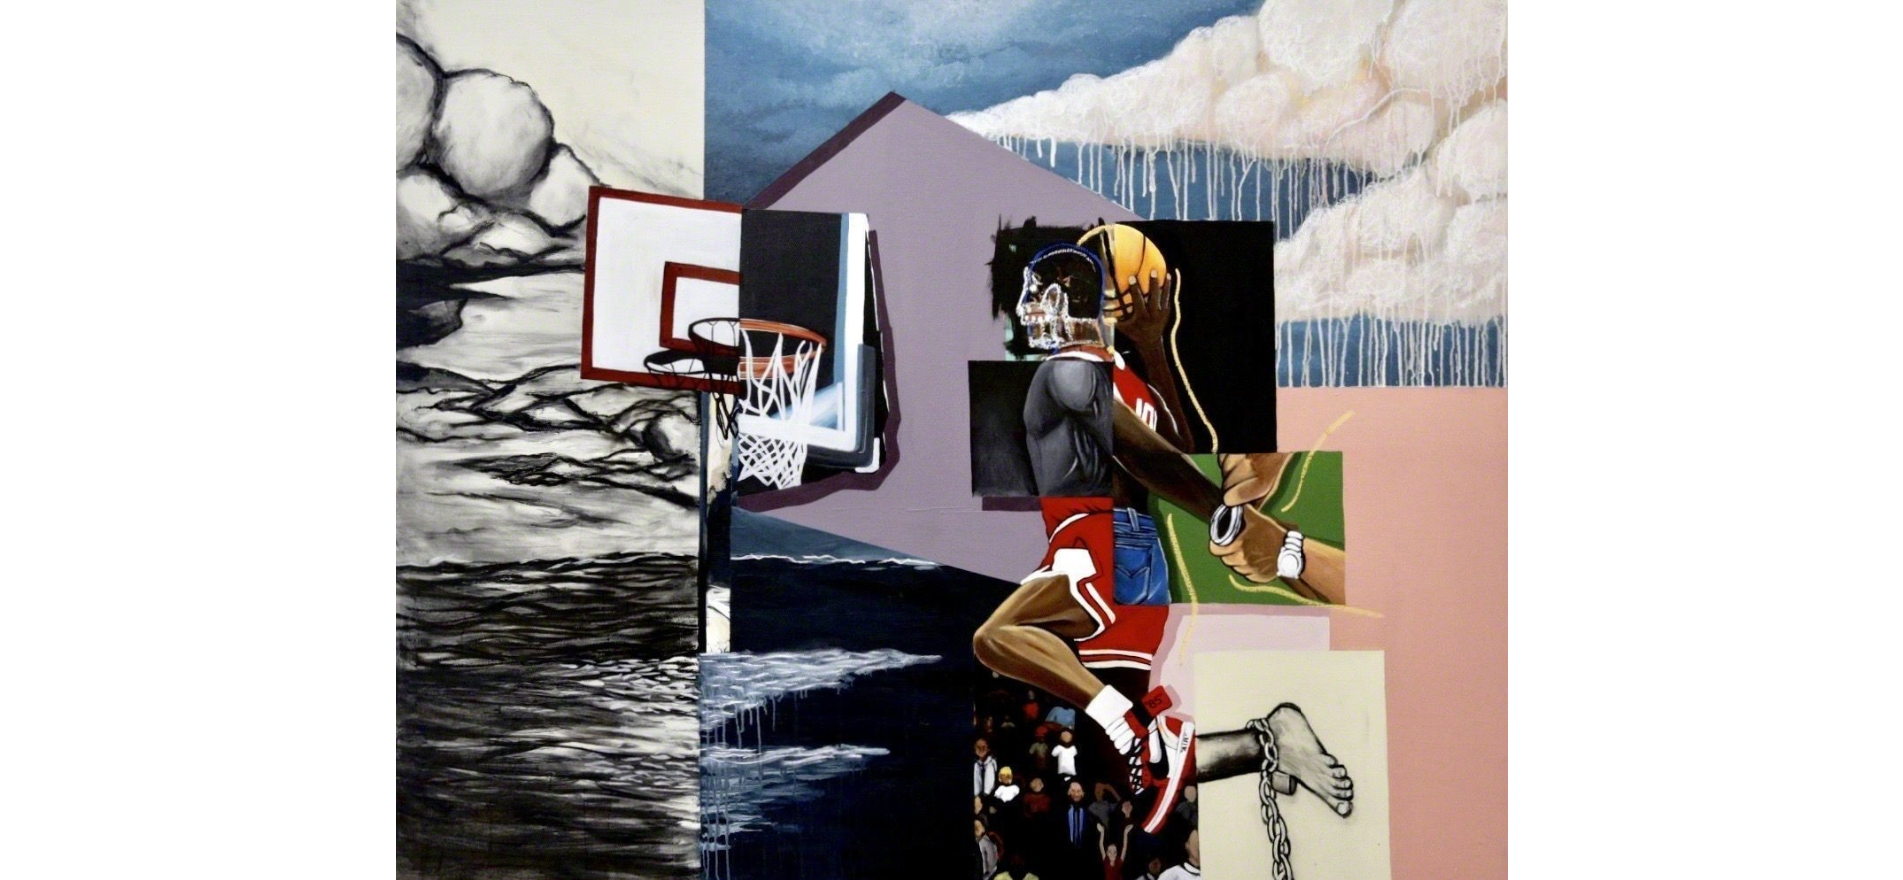 Collage-like painting of a man shooting a basket with shackles on his ankle and he's being handcuffed.